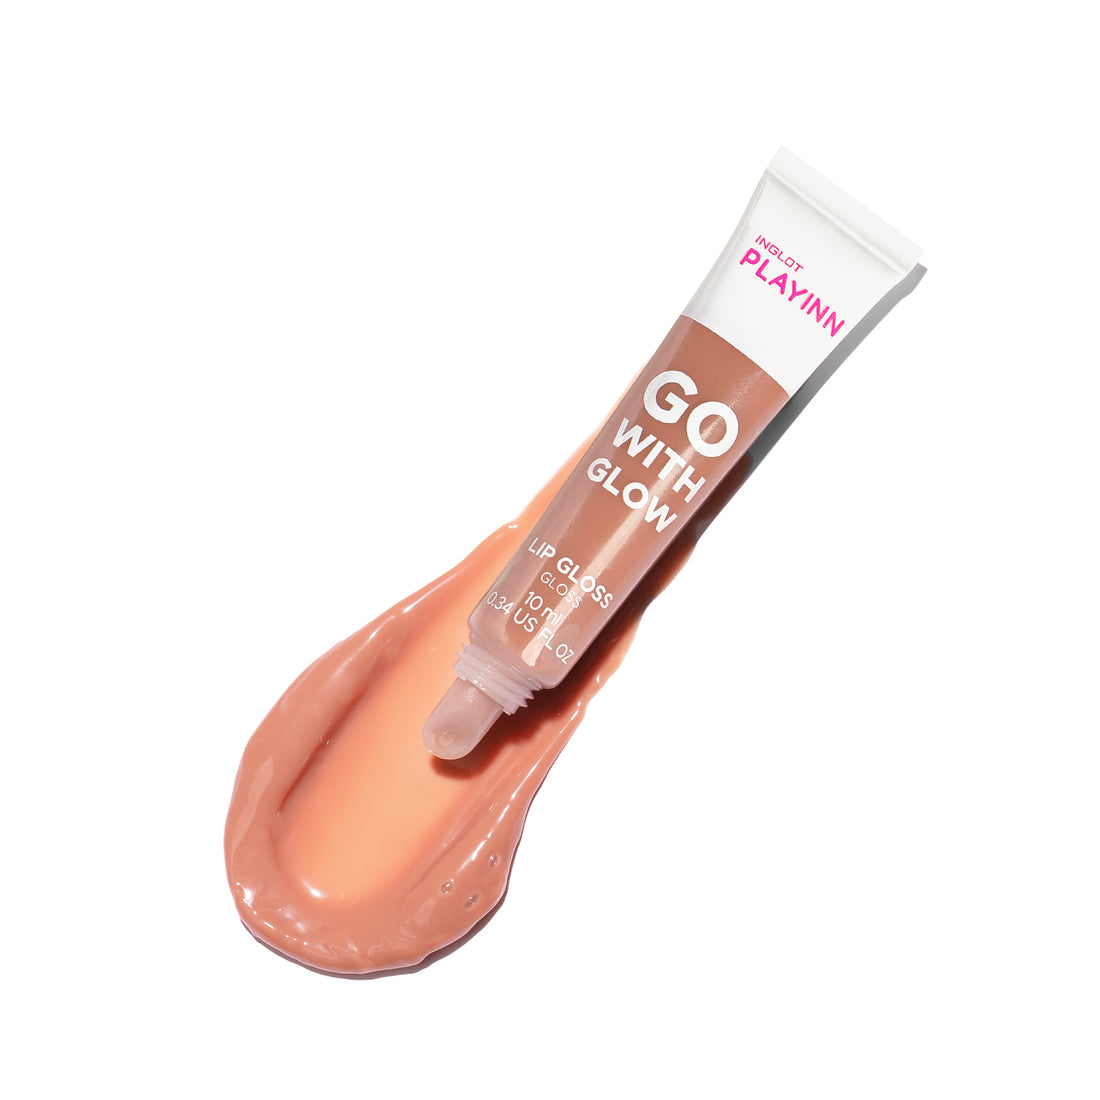 Go With Glow Lipgloss 22 - Inglot Cosmetics